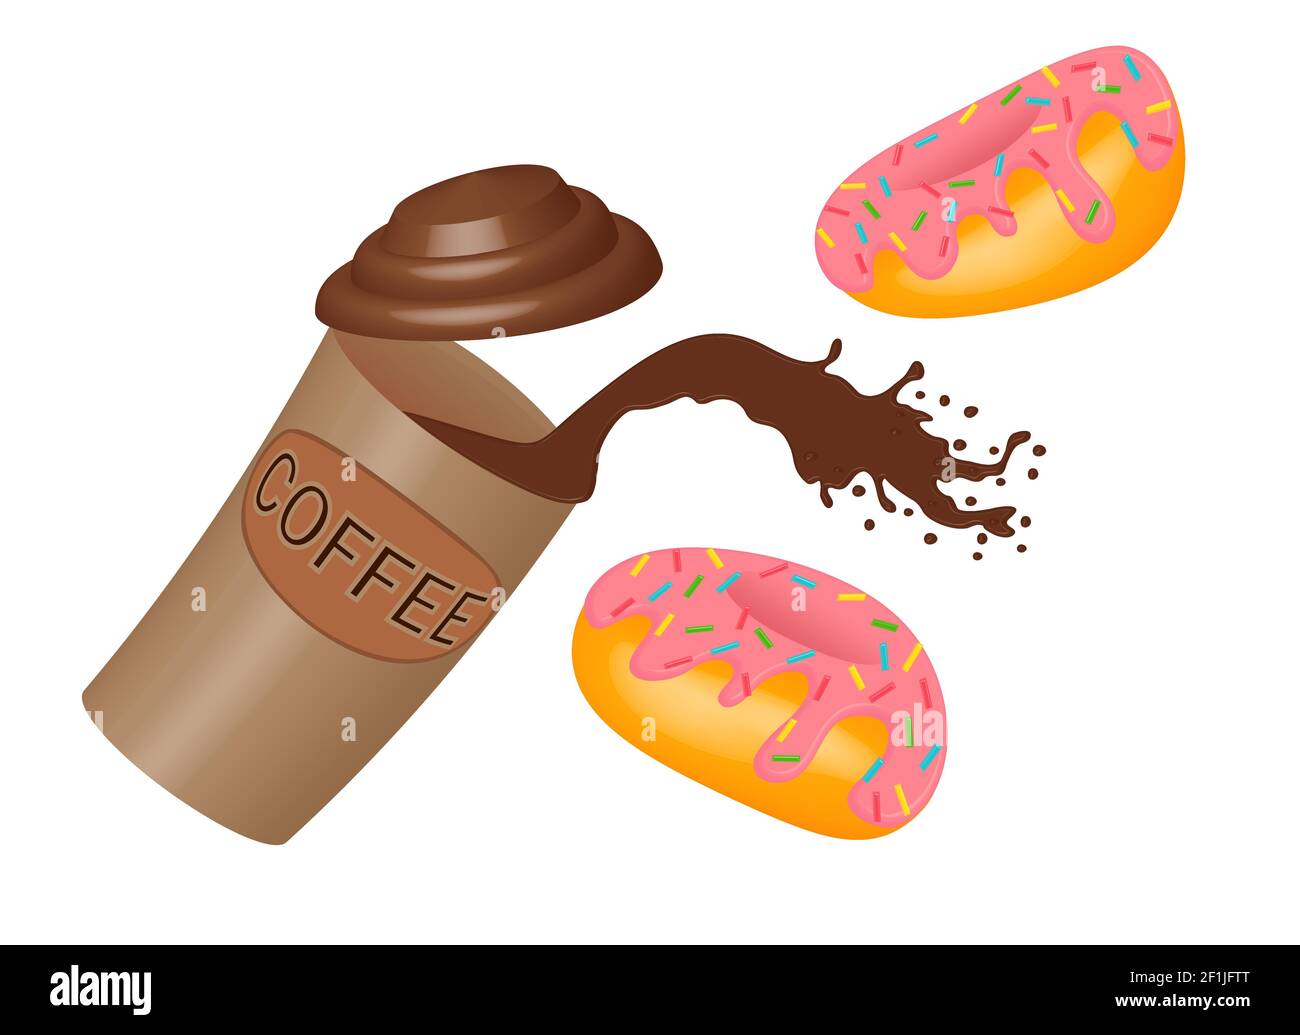 Splash of coffee in a paper cup and donuts with pink icing. Takeaway food, a splash of hot chocolate from a disposable cup and flying caramel donuts Stock Photo